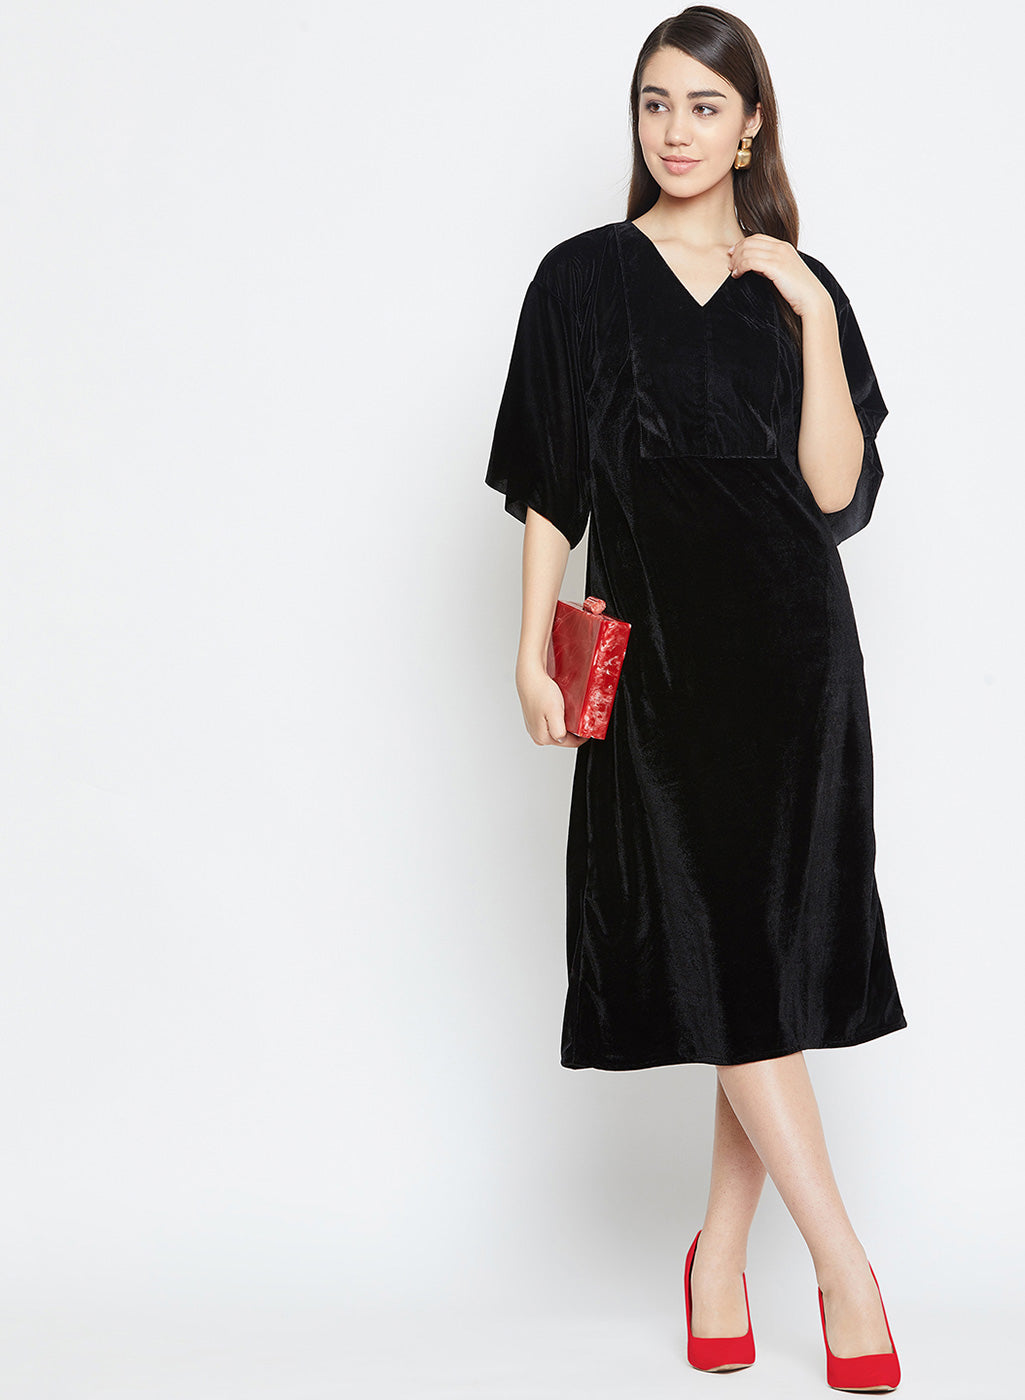 Color block your velvet dress for a chic date night look